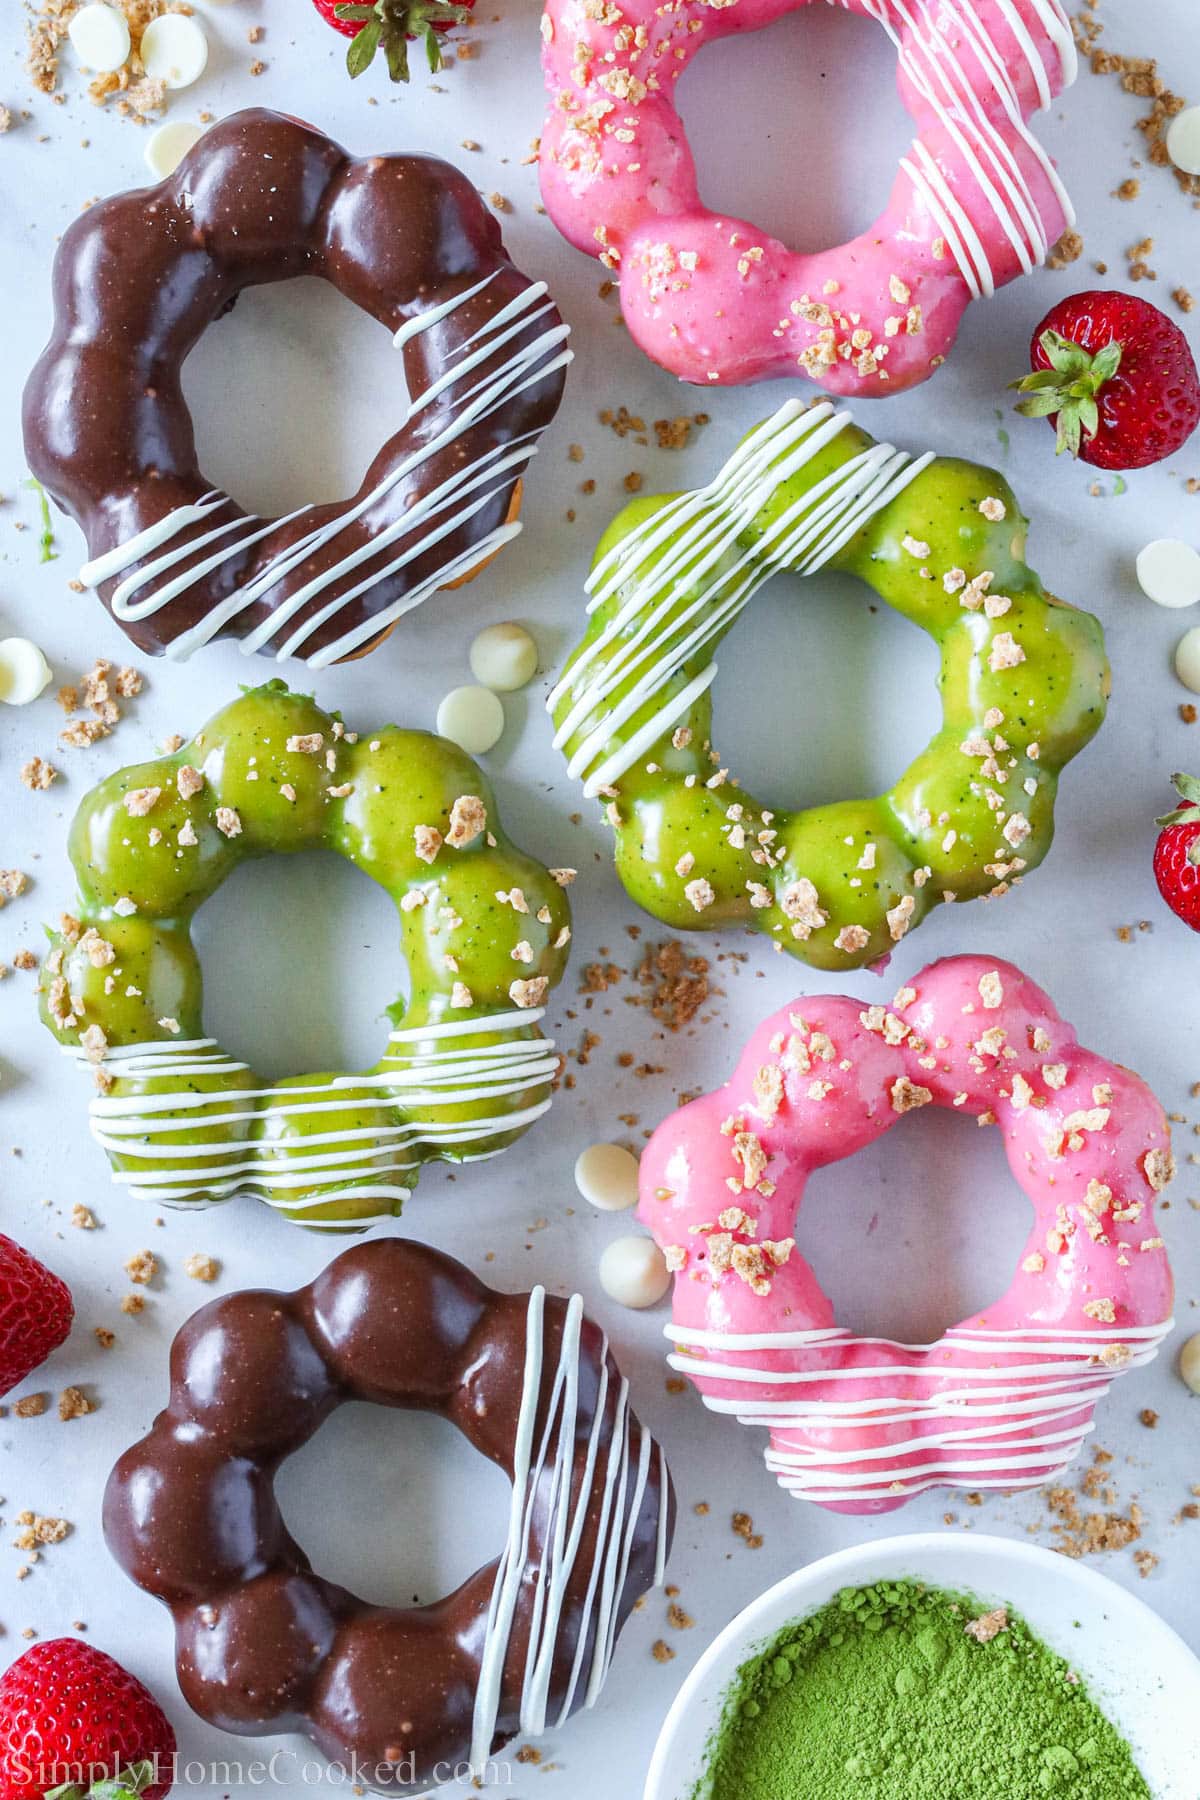 Mochi Donuts covered in matcha glaze, Nutella glaze, and strawberry glaze, then drizzled with white chocolate.